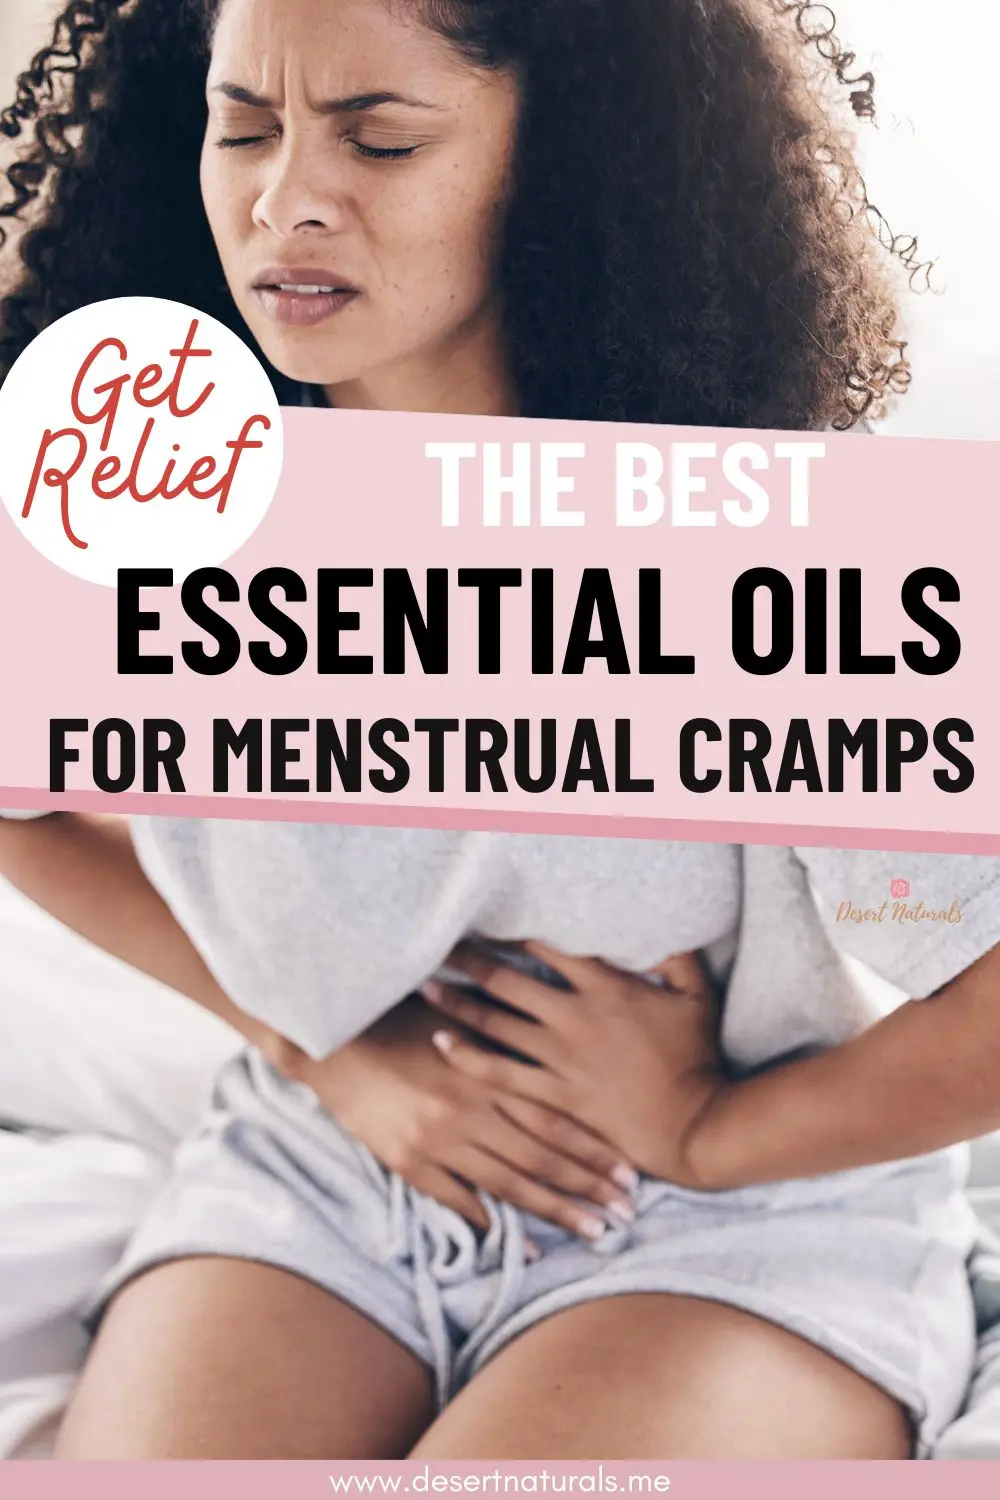 woman in pain from menstrual cramps + text get relief the best essential oils for menstrual cramps